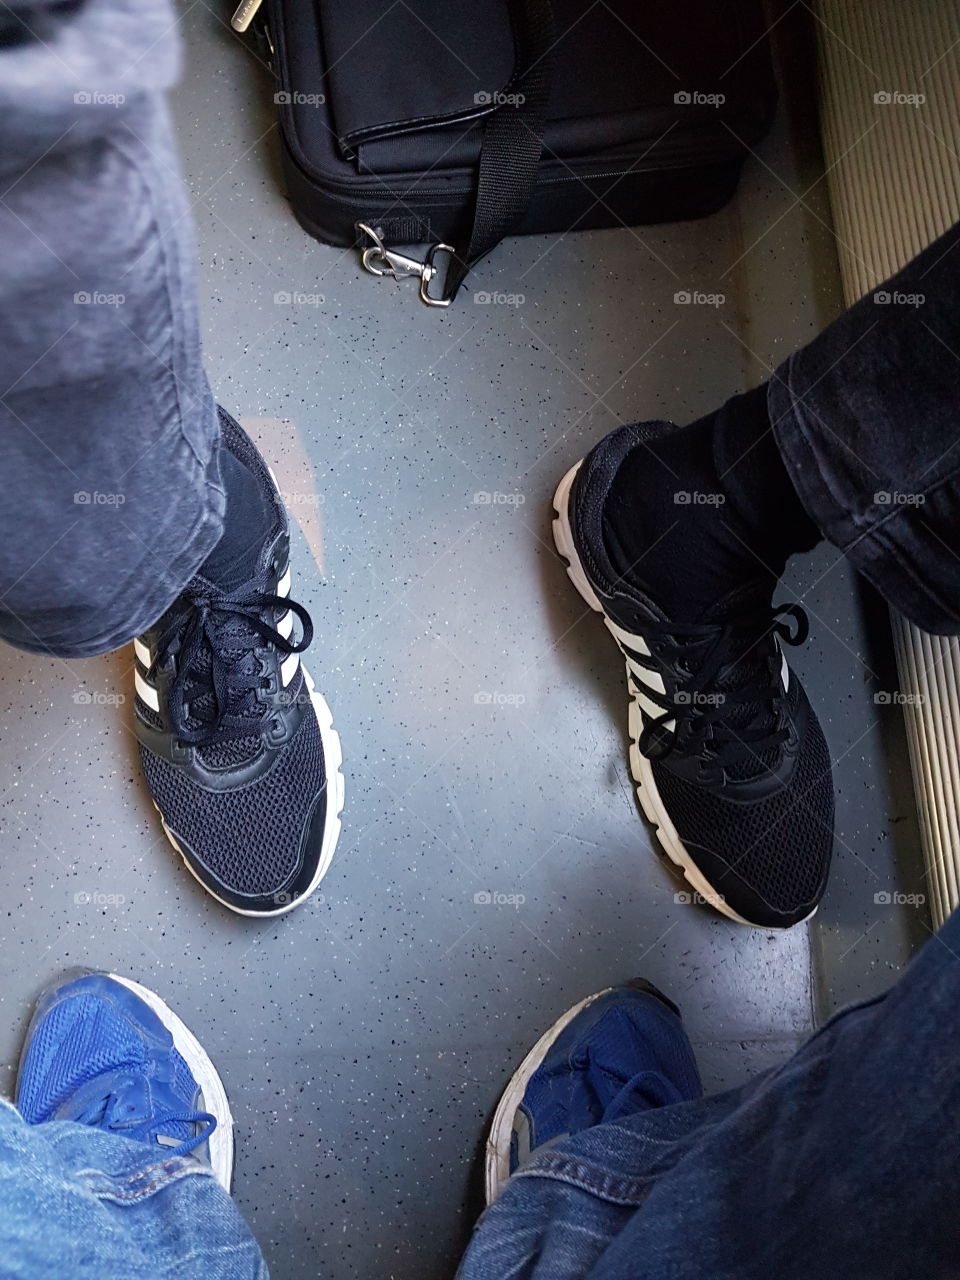 shoes on the train